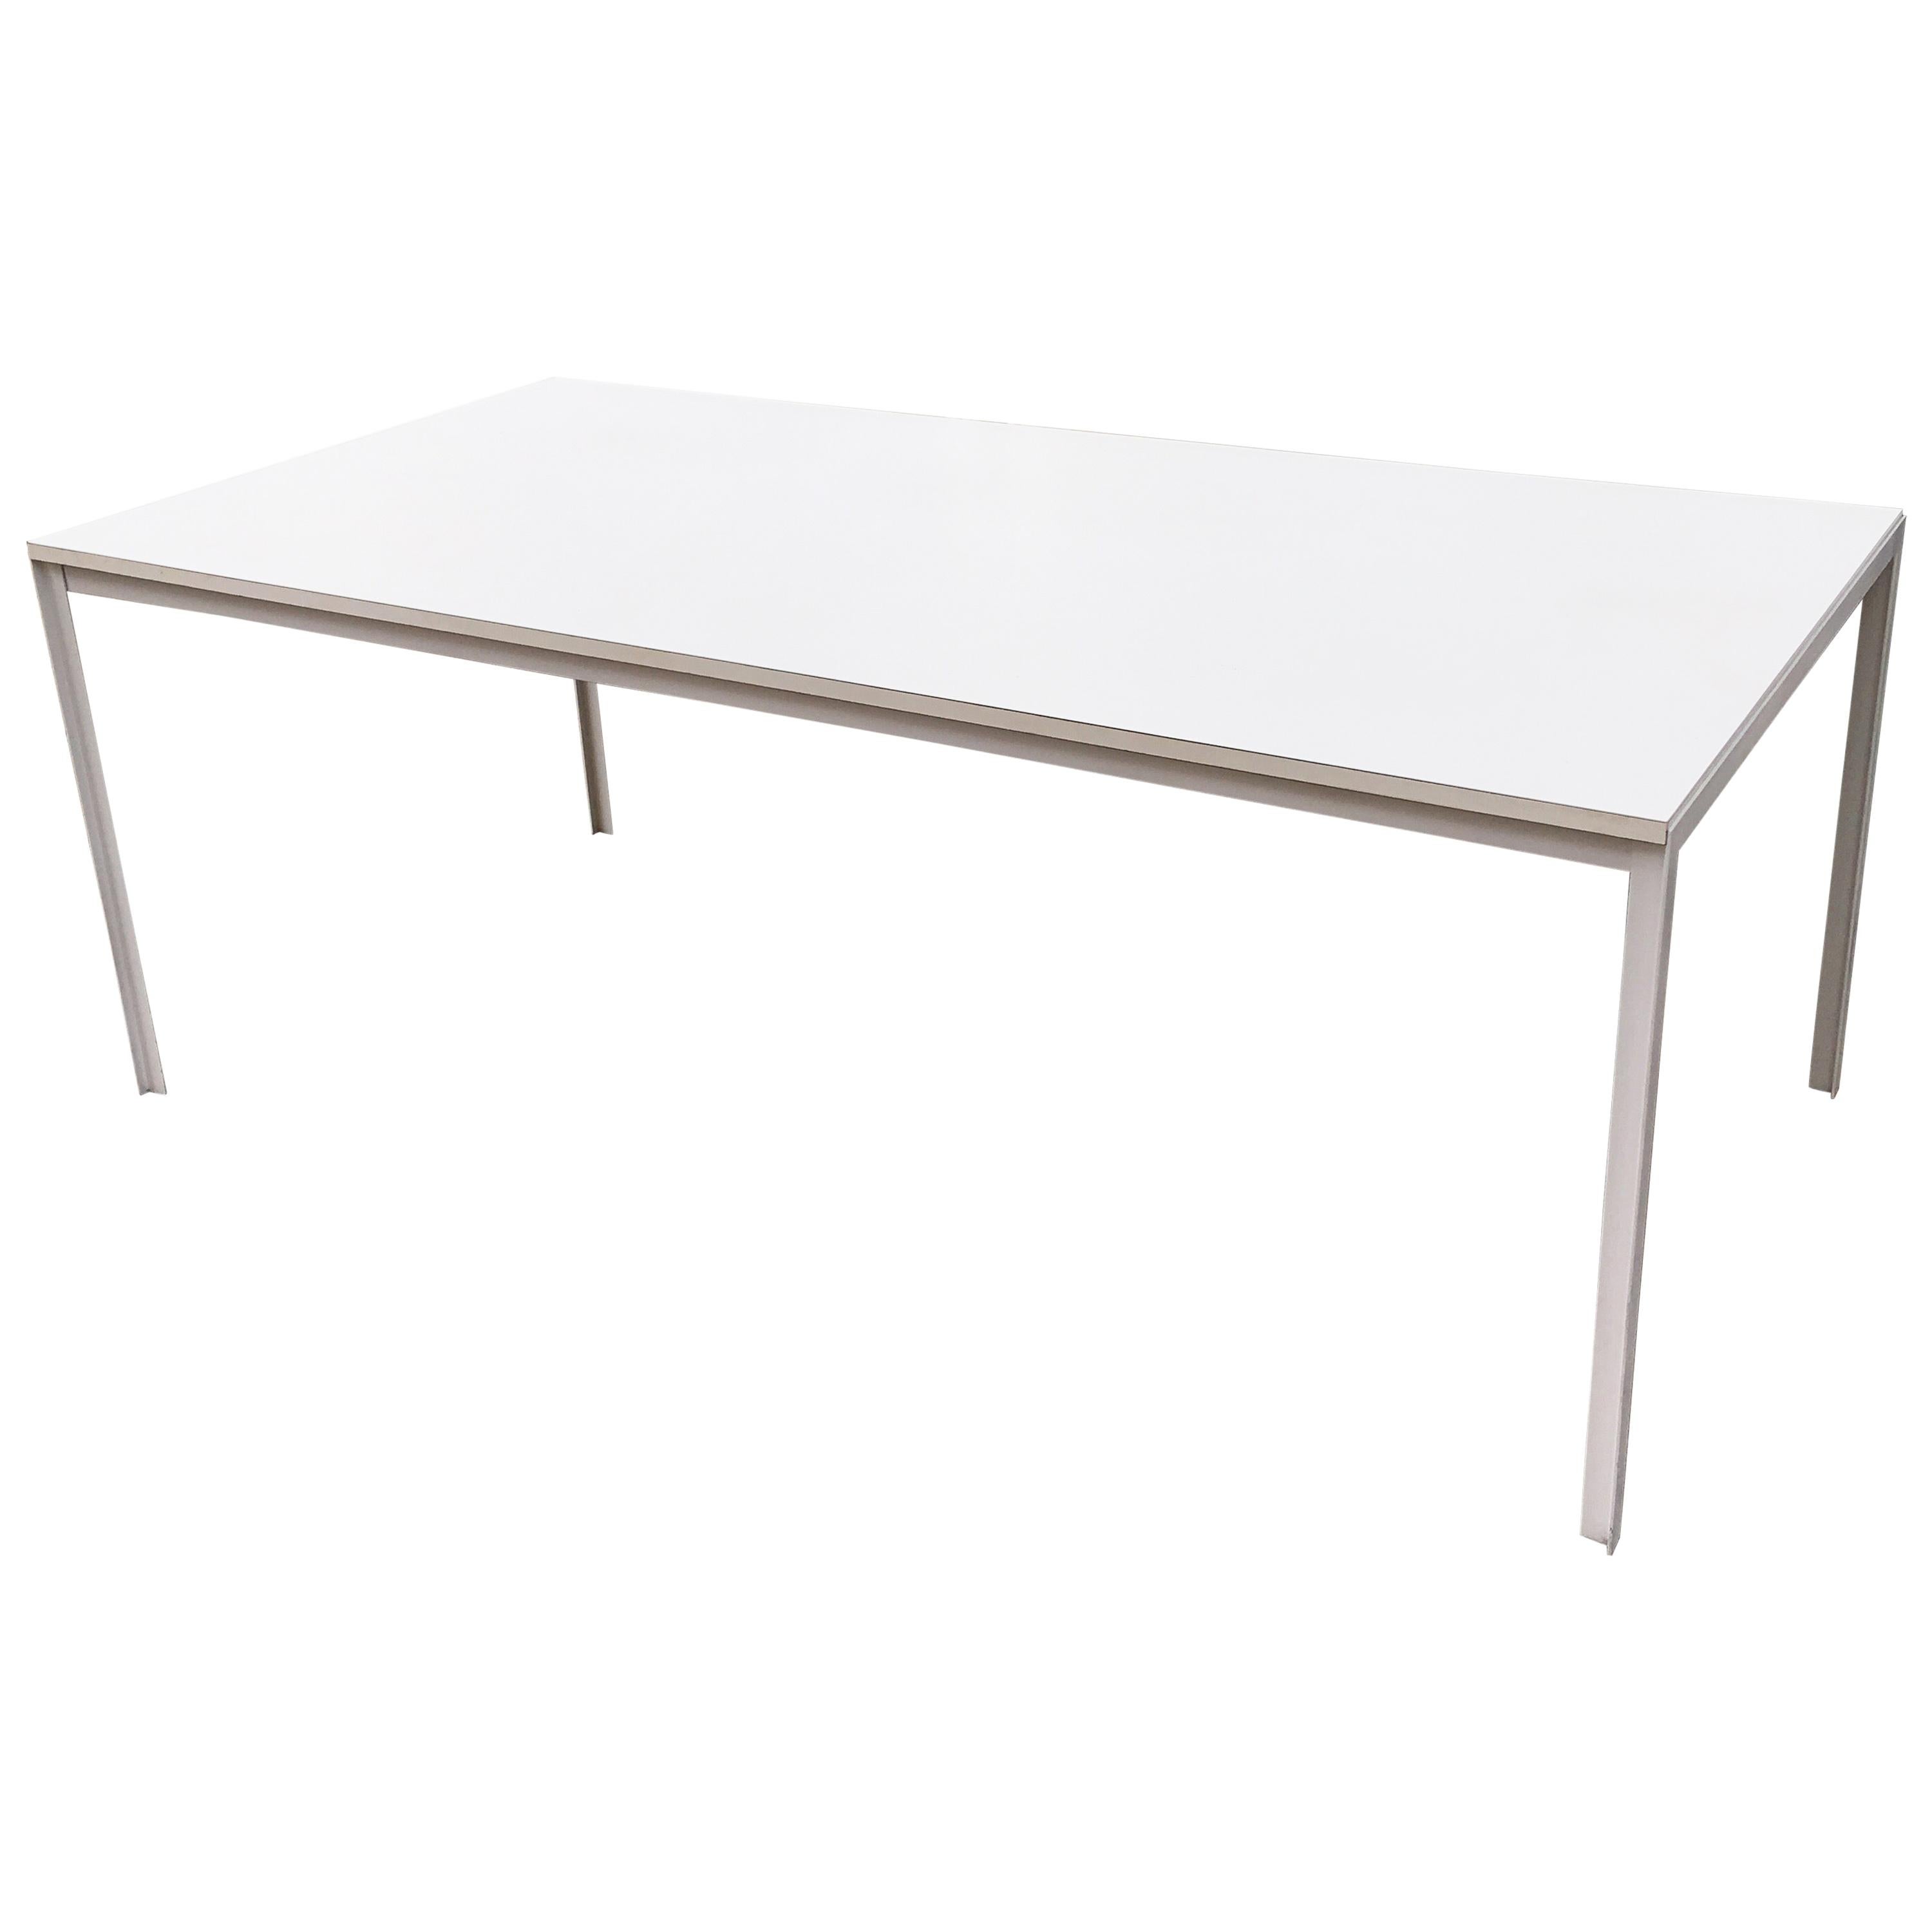 Knoll Angle Iron White Formica Dining Table